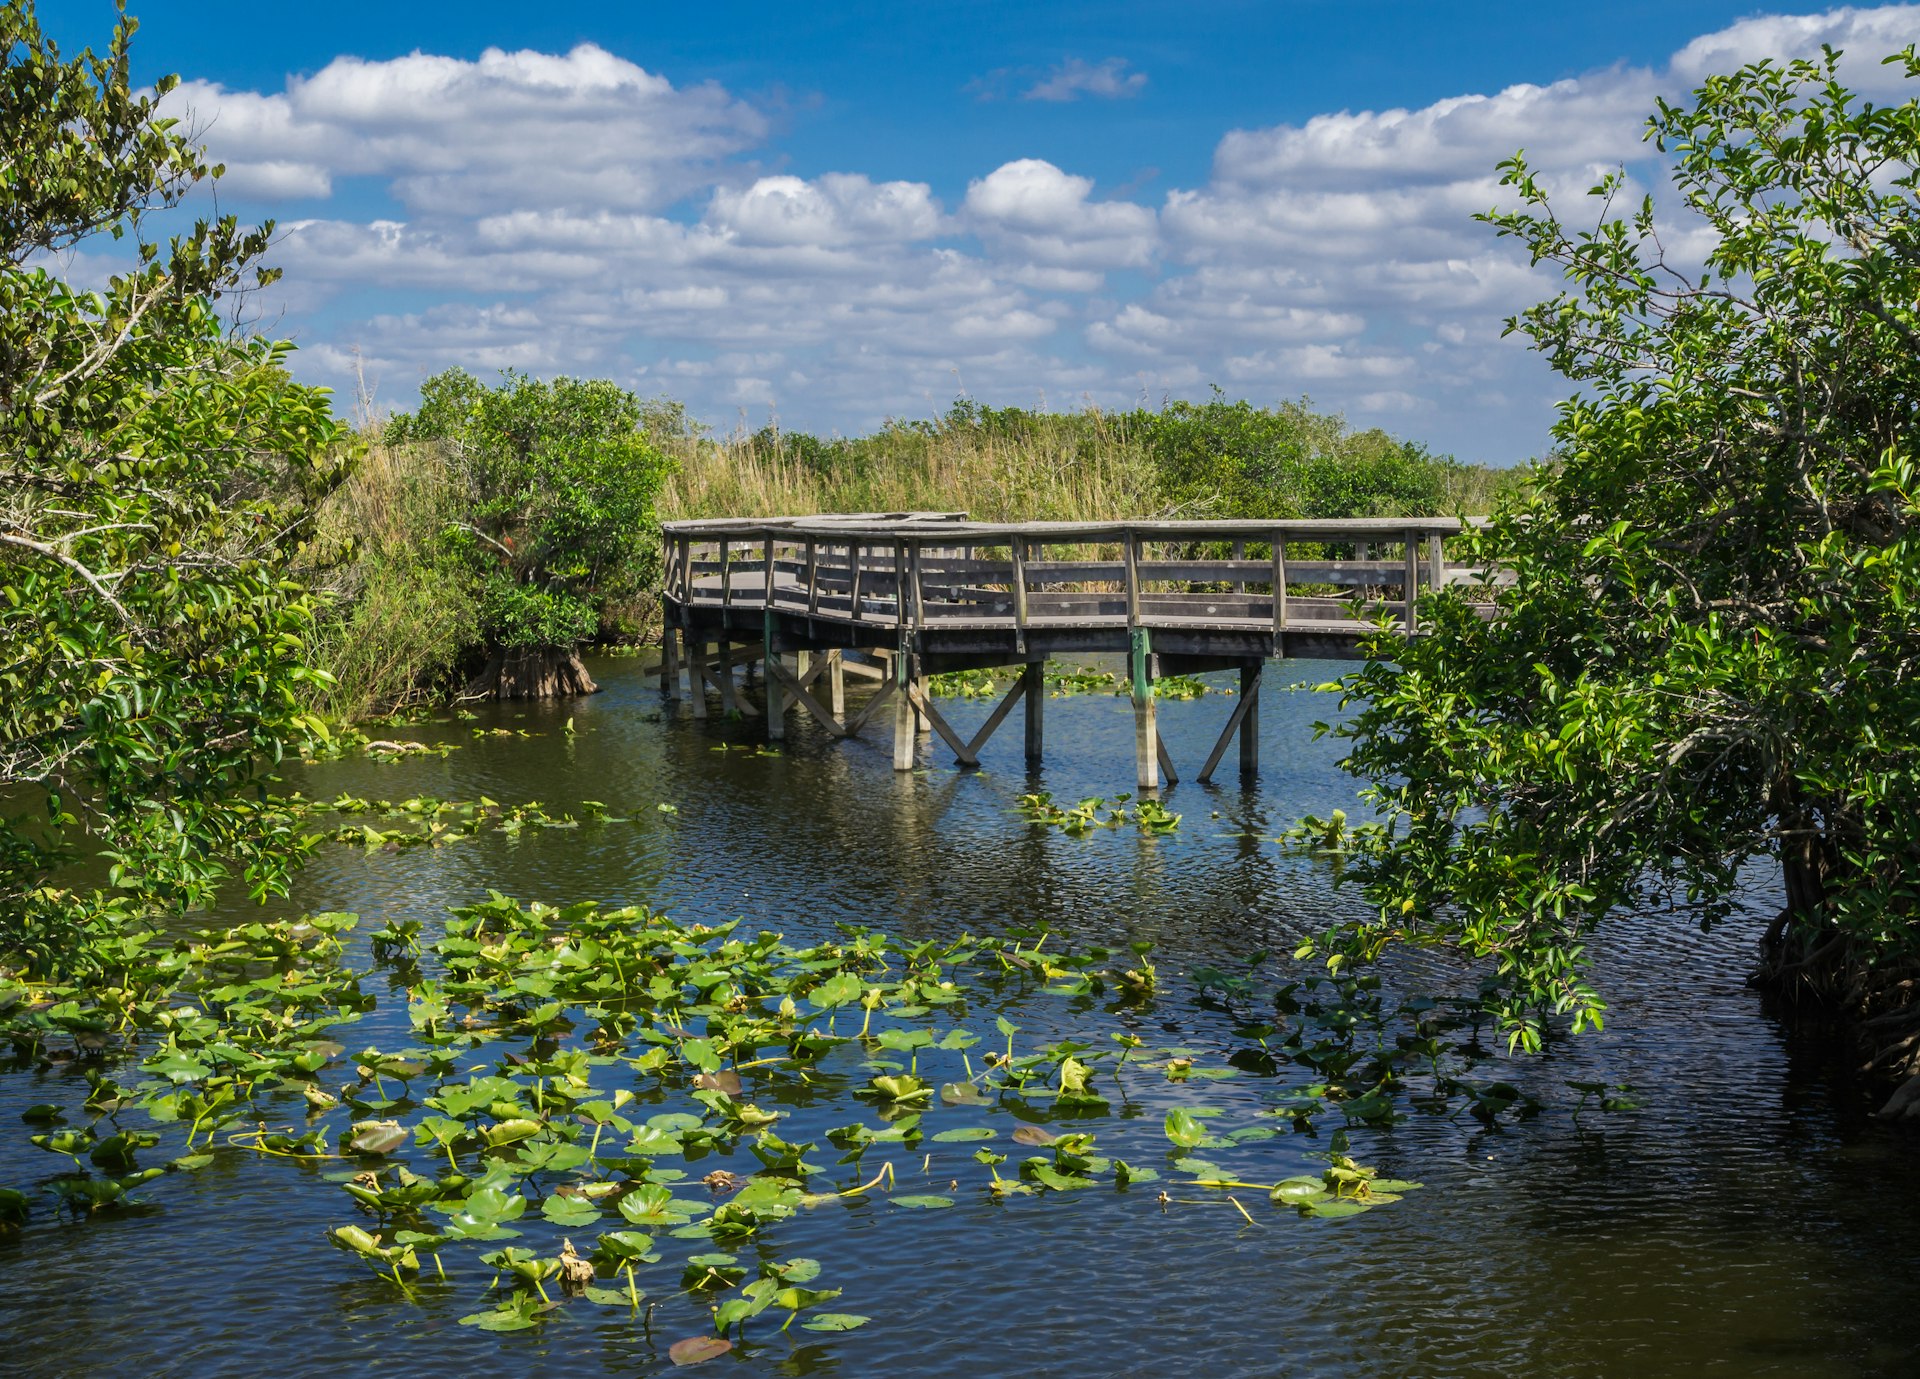 Must See Sights at Everglades National Park - U.S.A. – My Nature